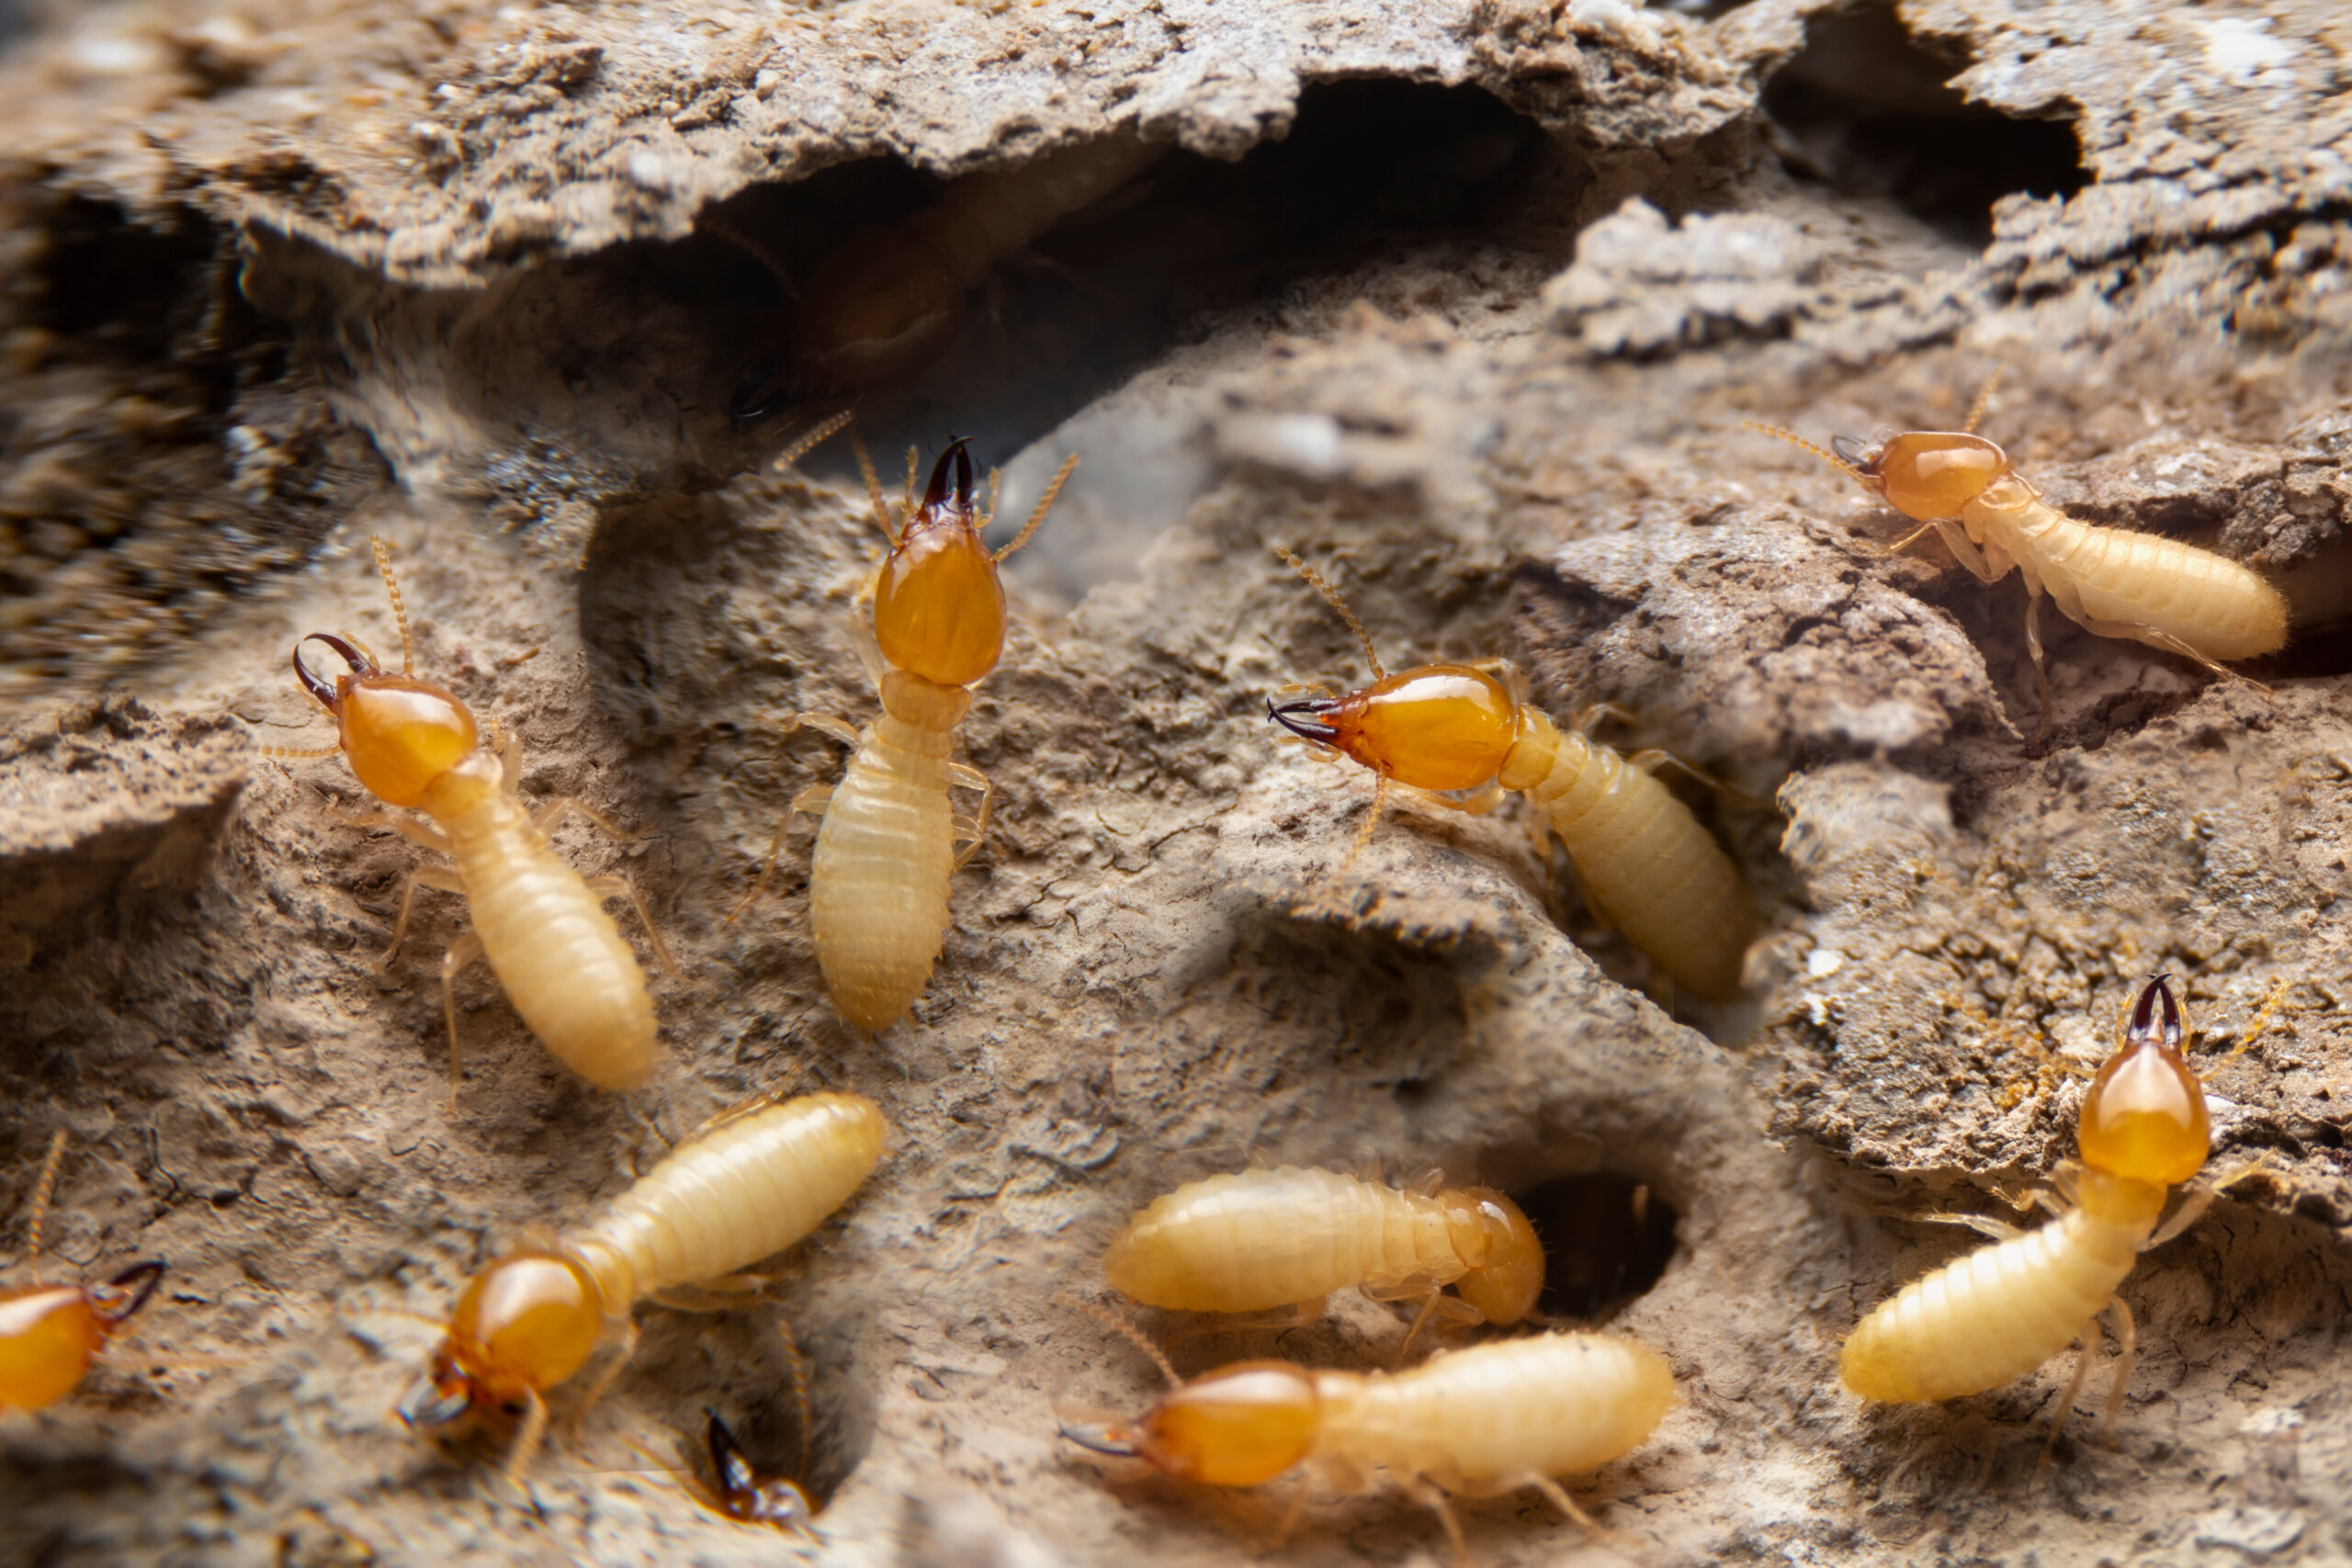 Termite grubs eating away at a piece of wood.